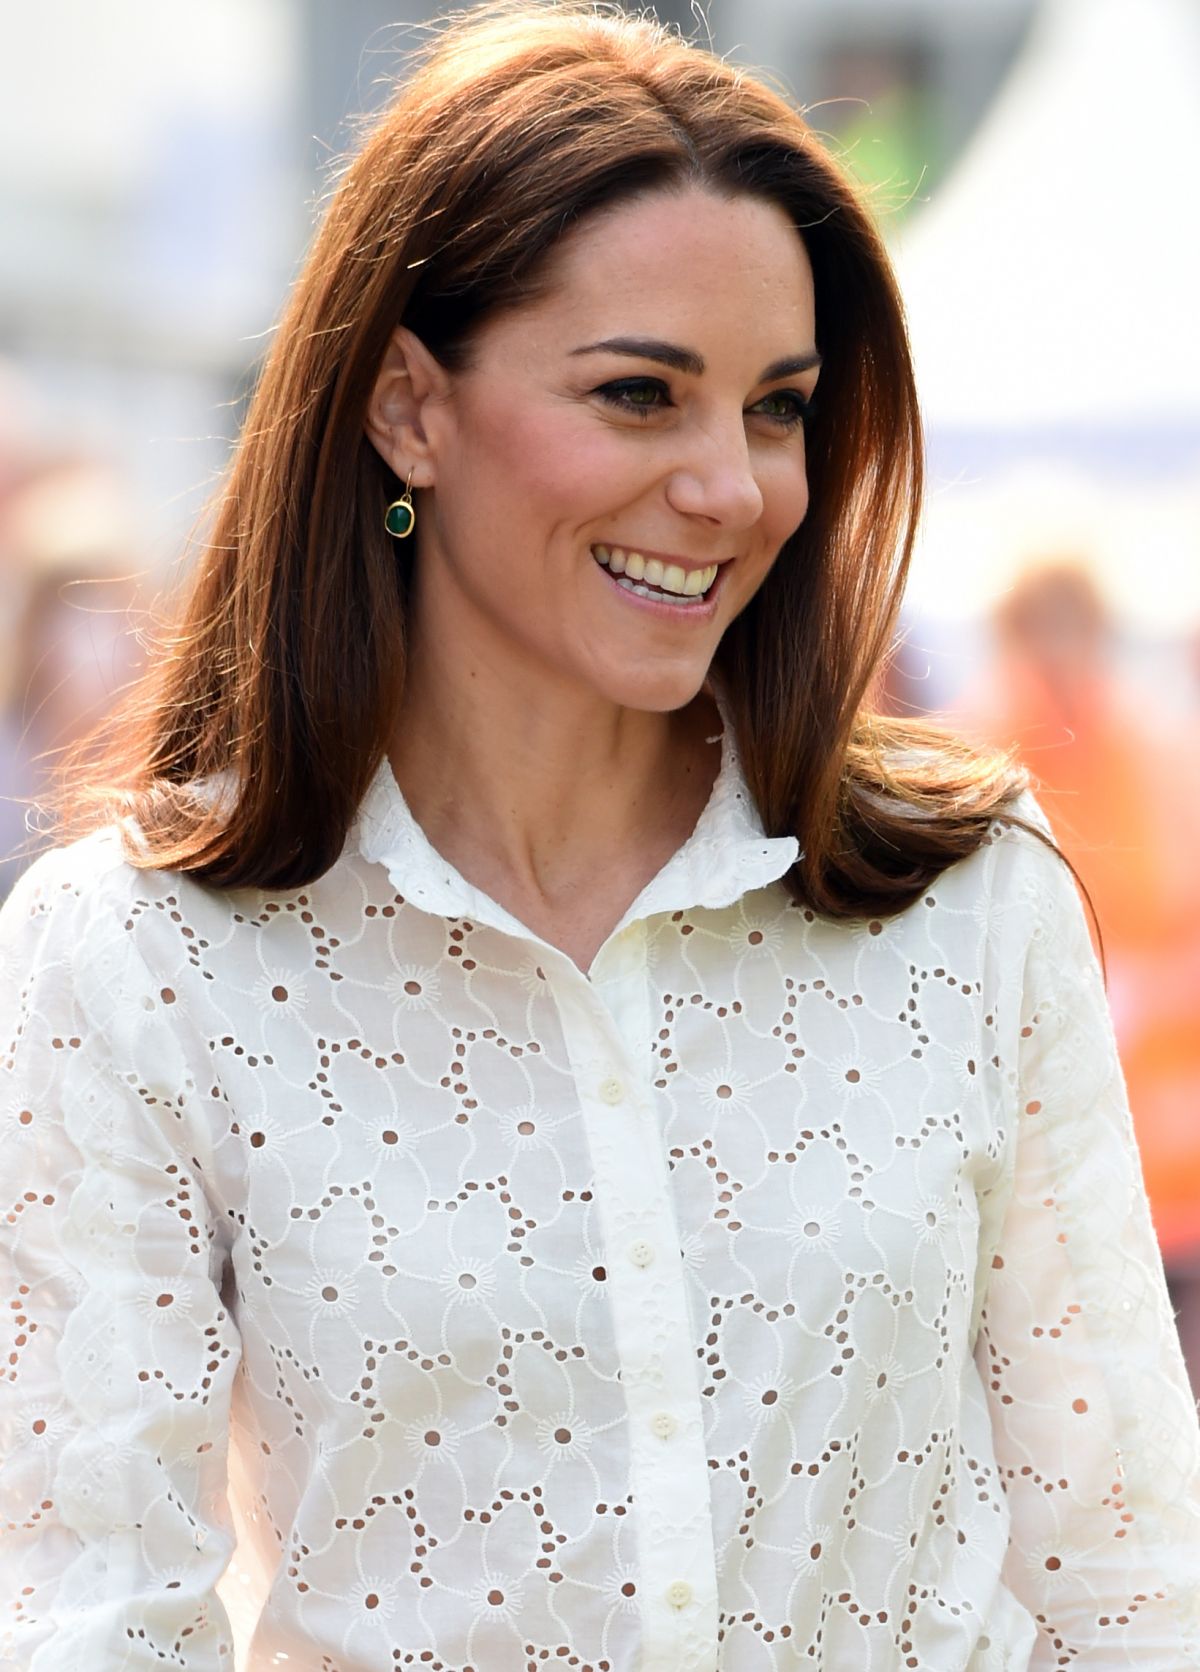 KATE MIDDLETON at RHS Chelsea Flower Show 2019 in London 05/20/2019 ...